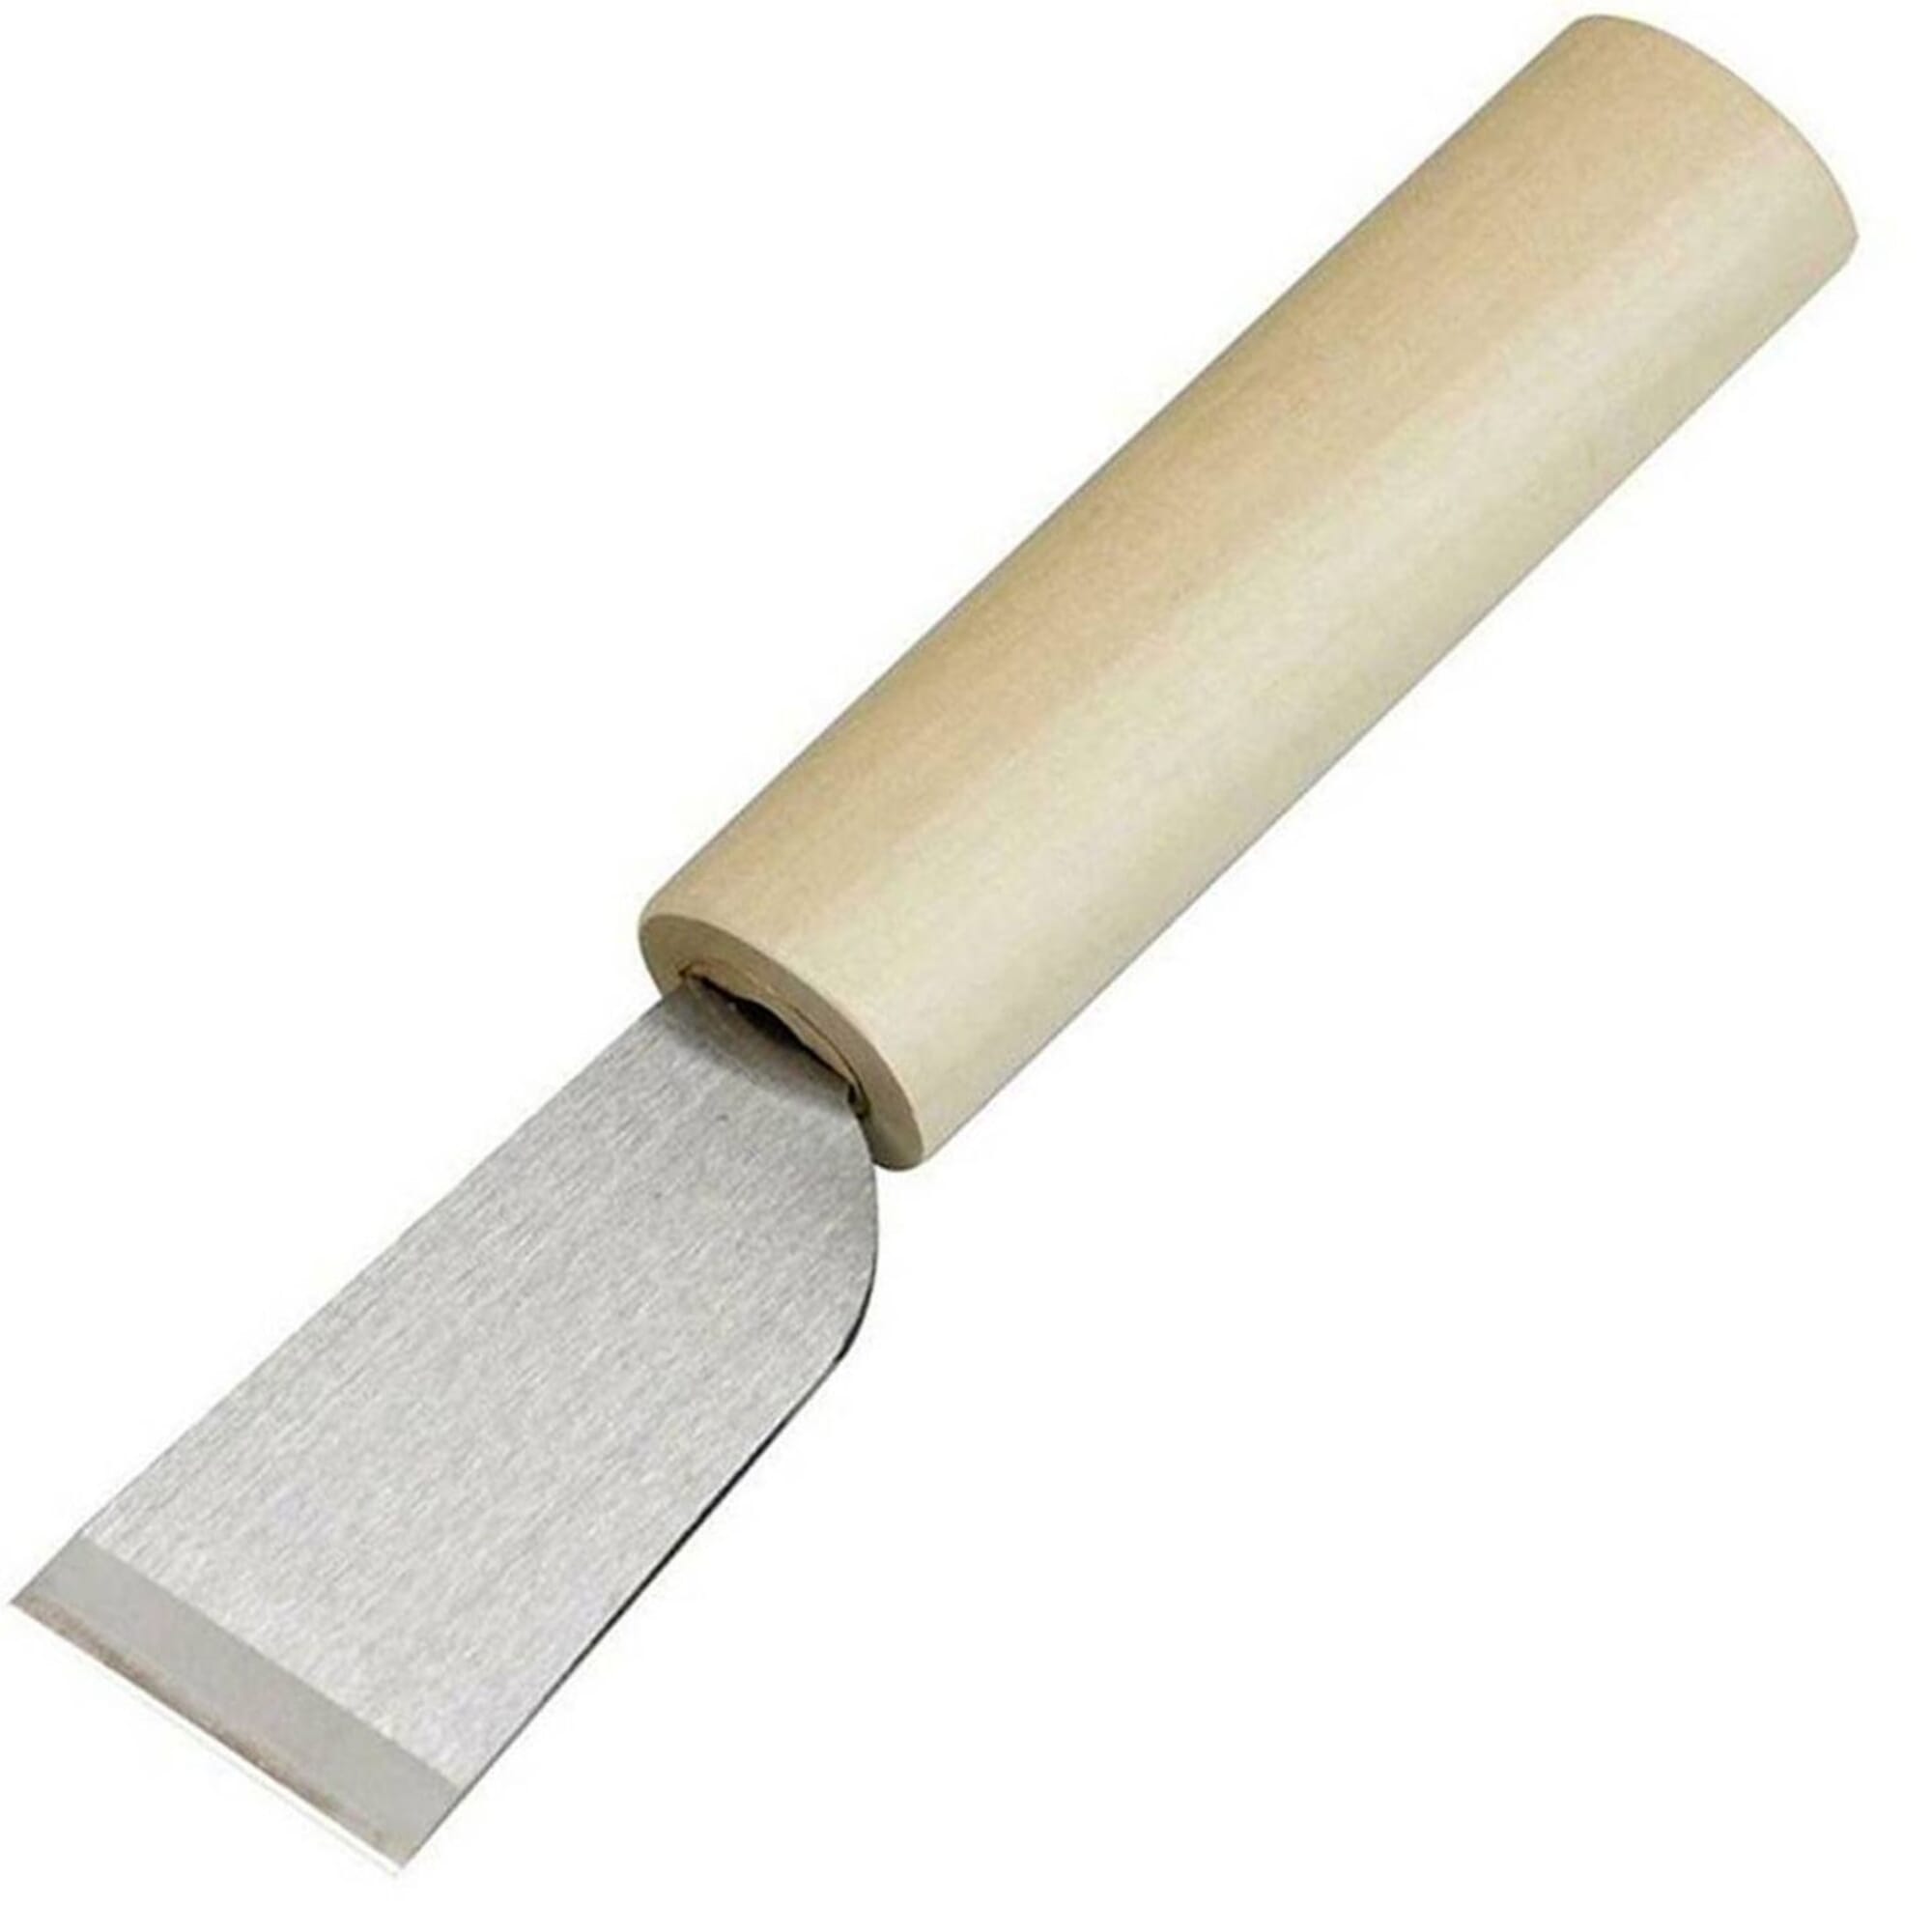 Leather Skiving Cutting Knife, Tools Cutting Leather